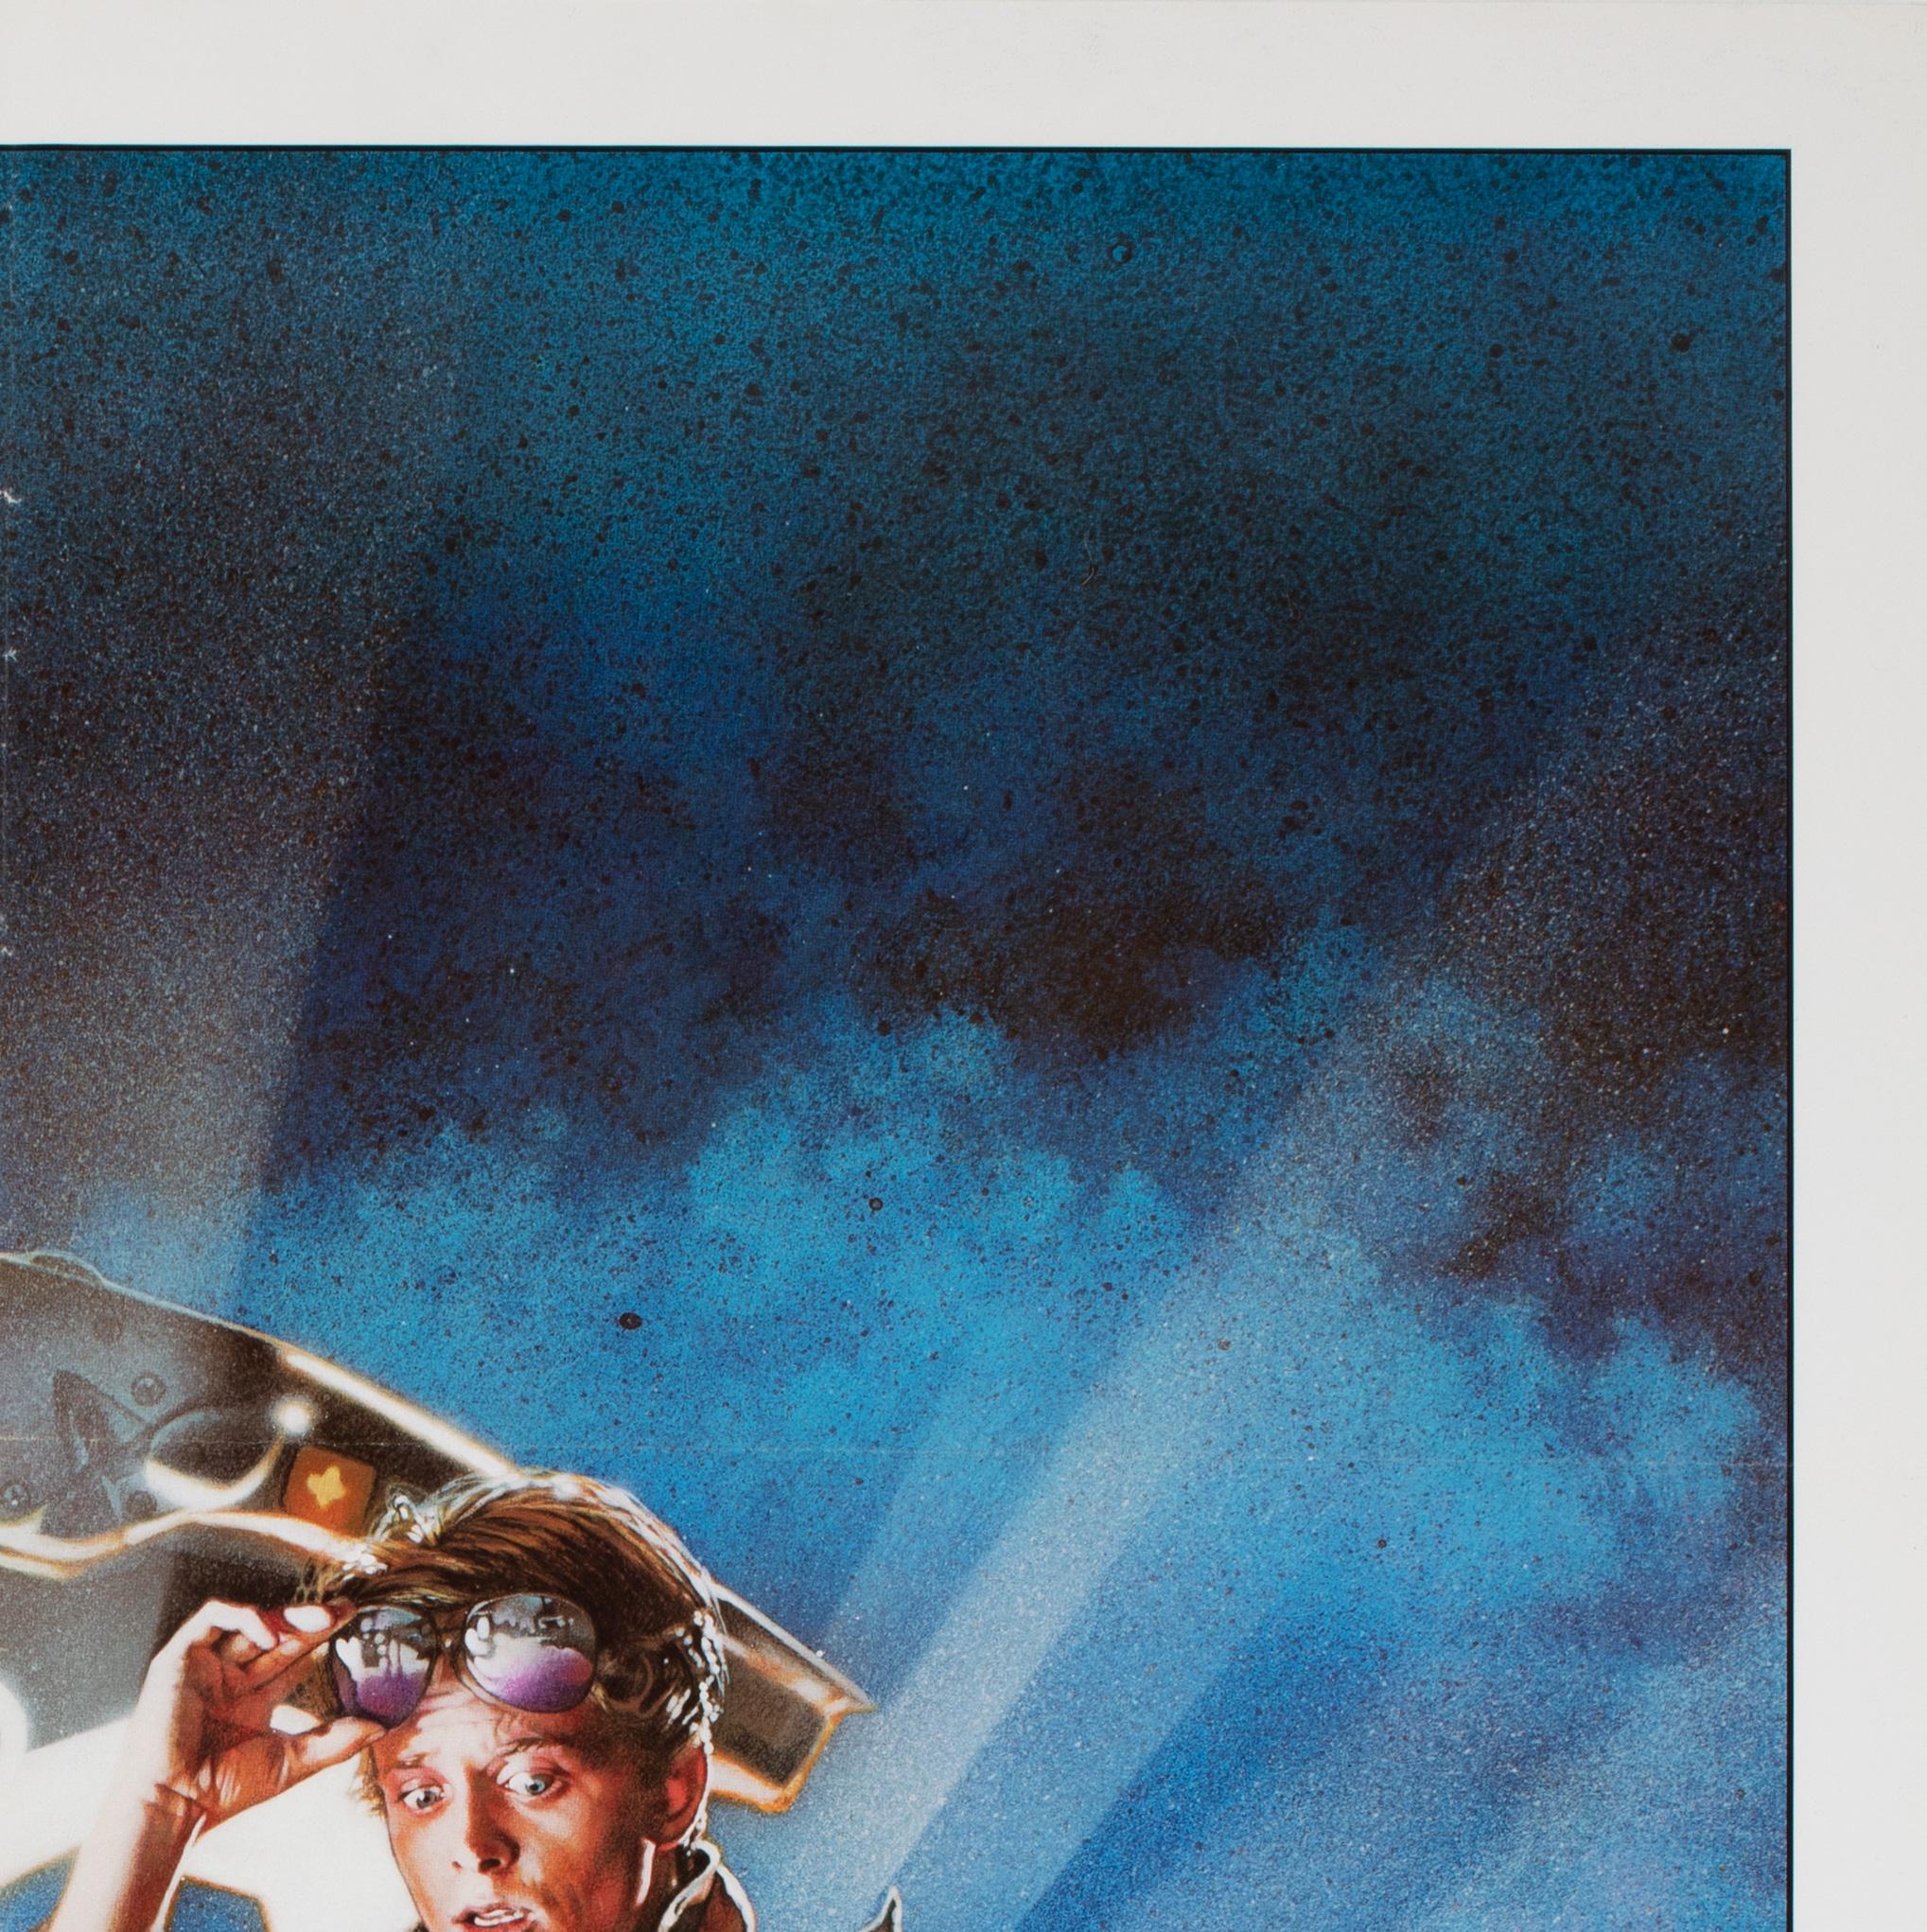 American Back to the Future 1985 US 1 Sheet Film Movie Poster, Drew Struzan For Sale